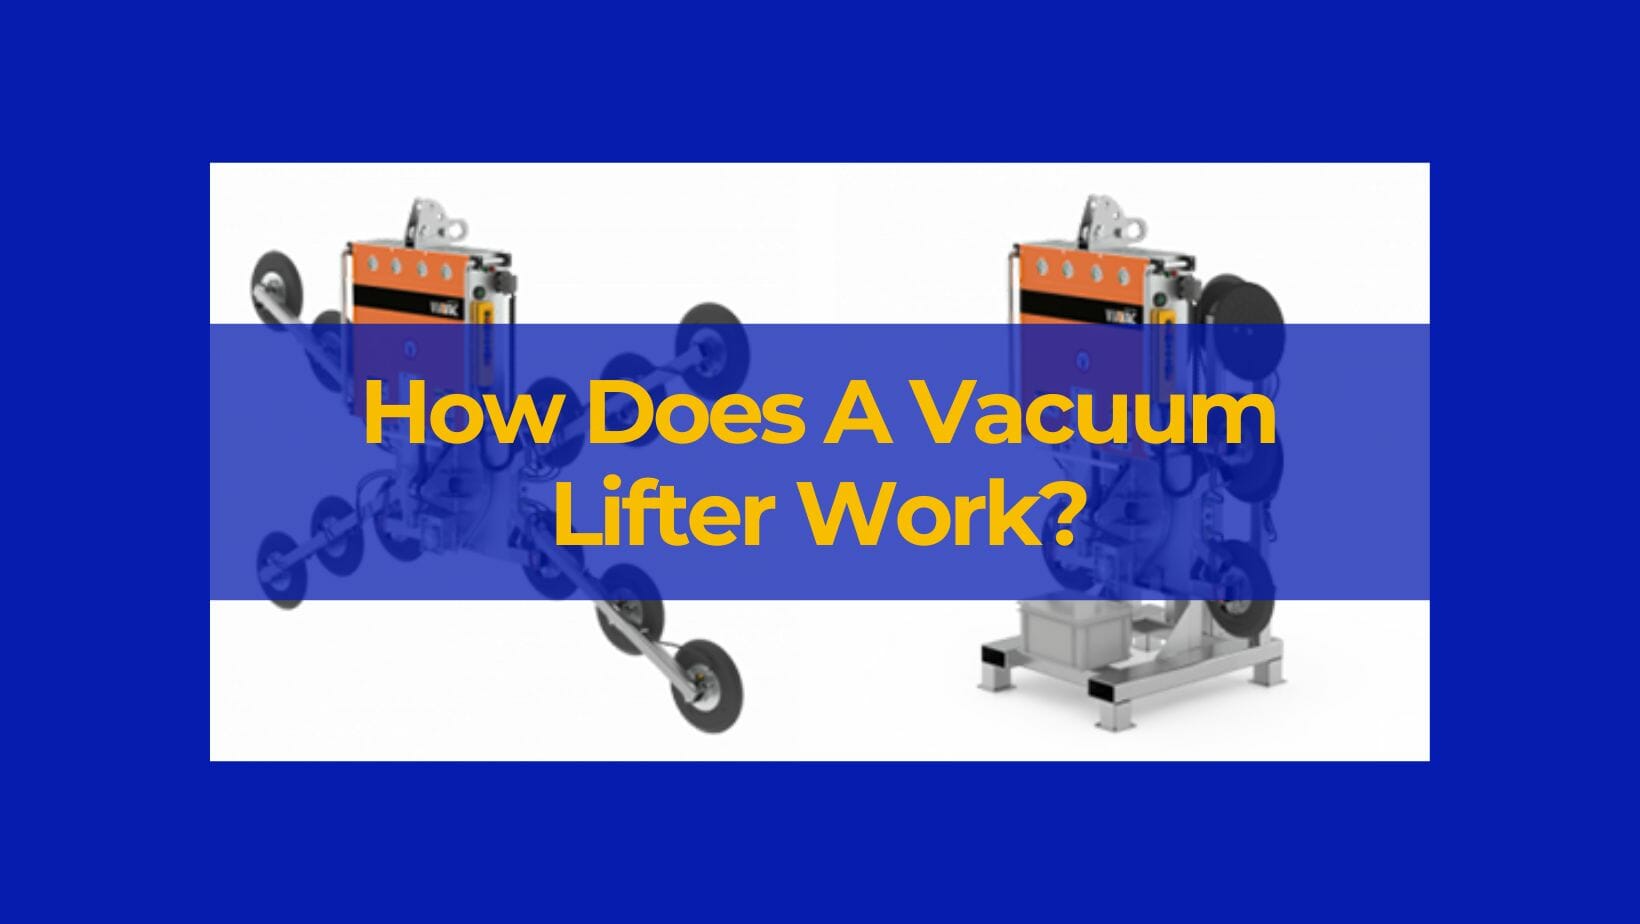 How Does a Vacuum Lifter Work?